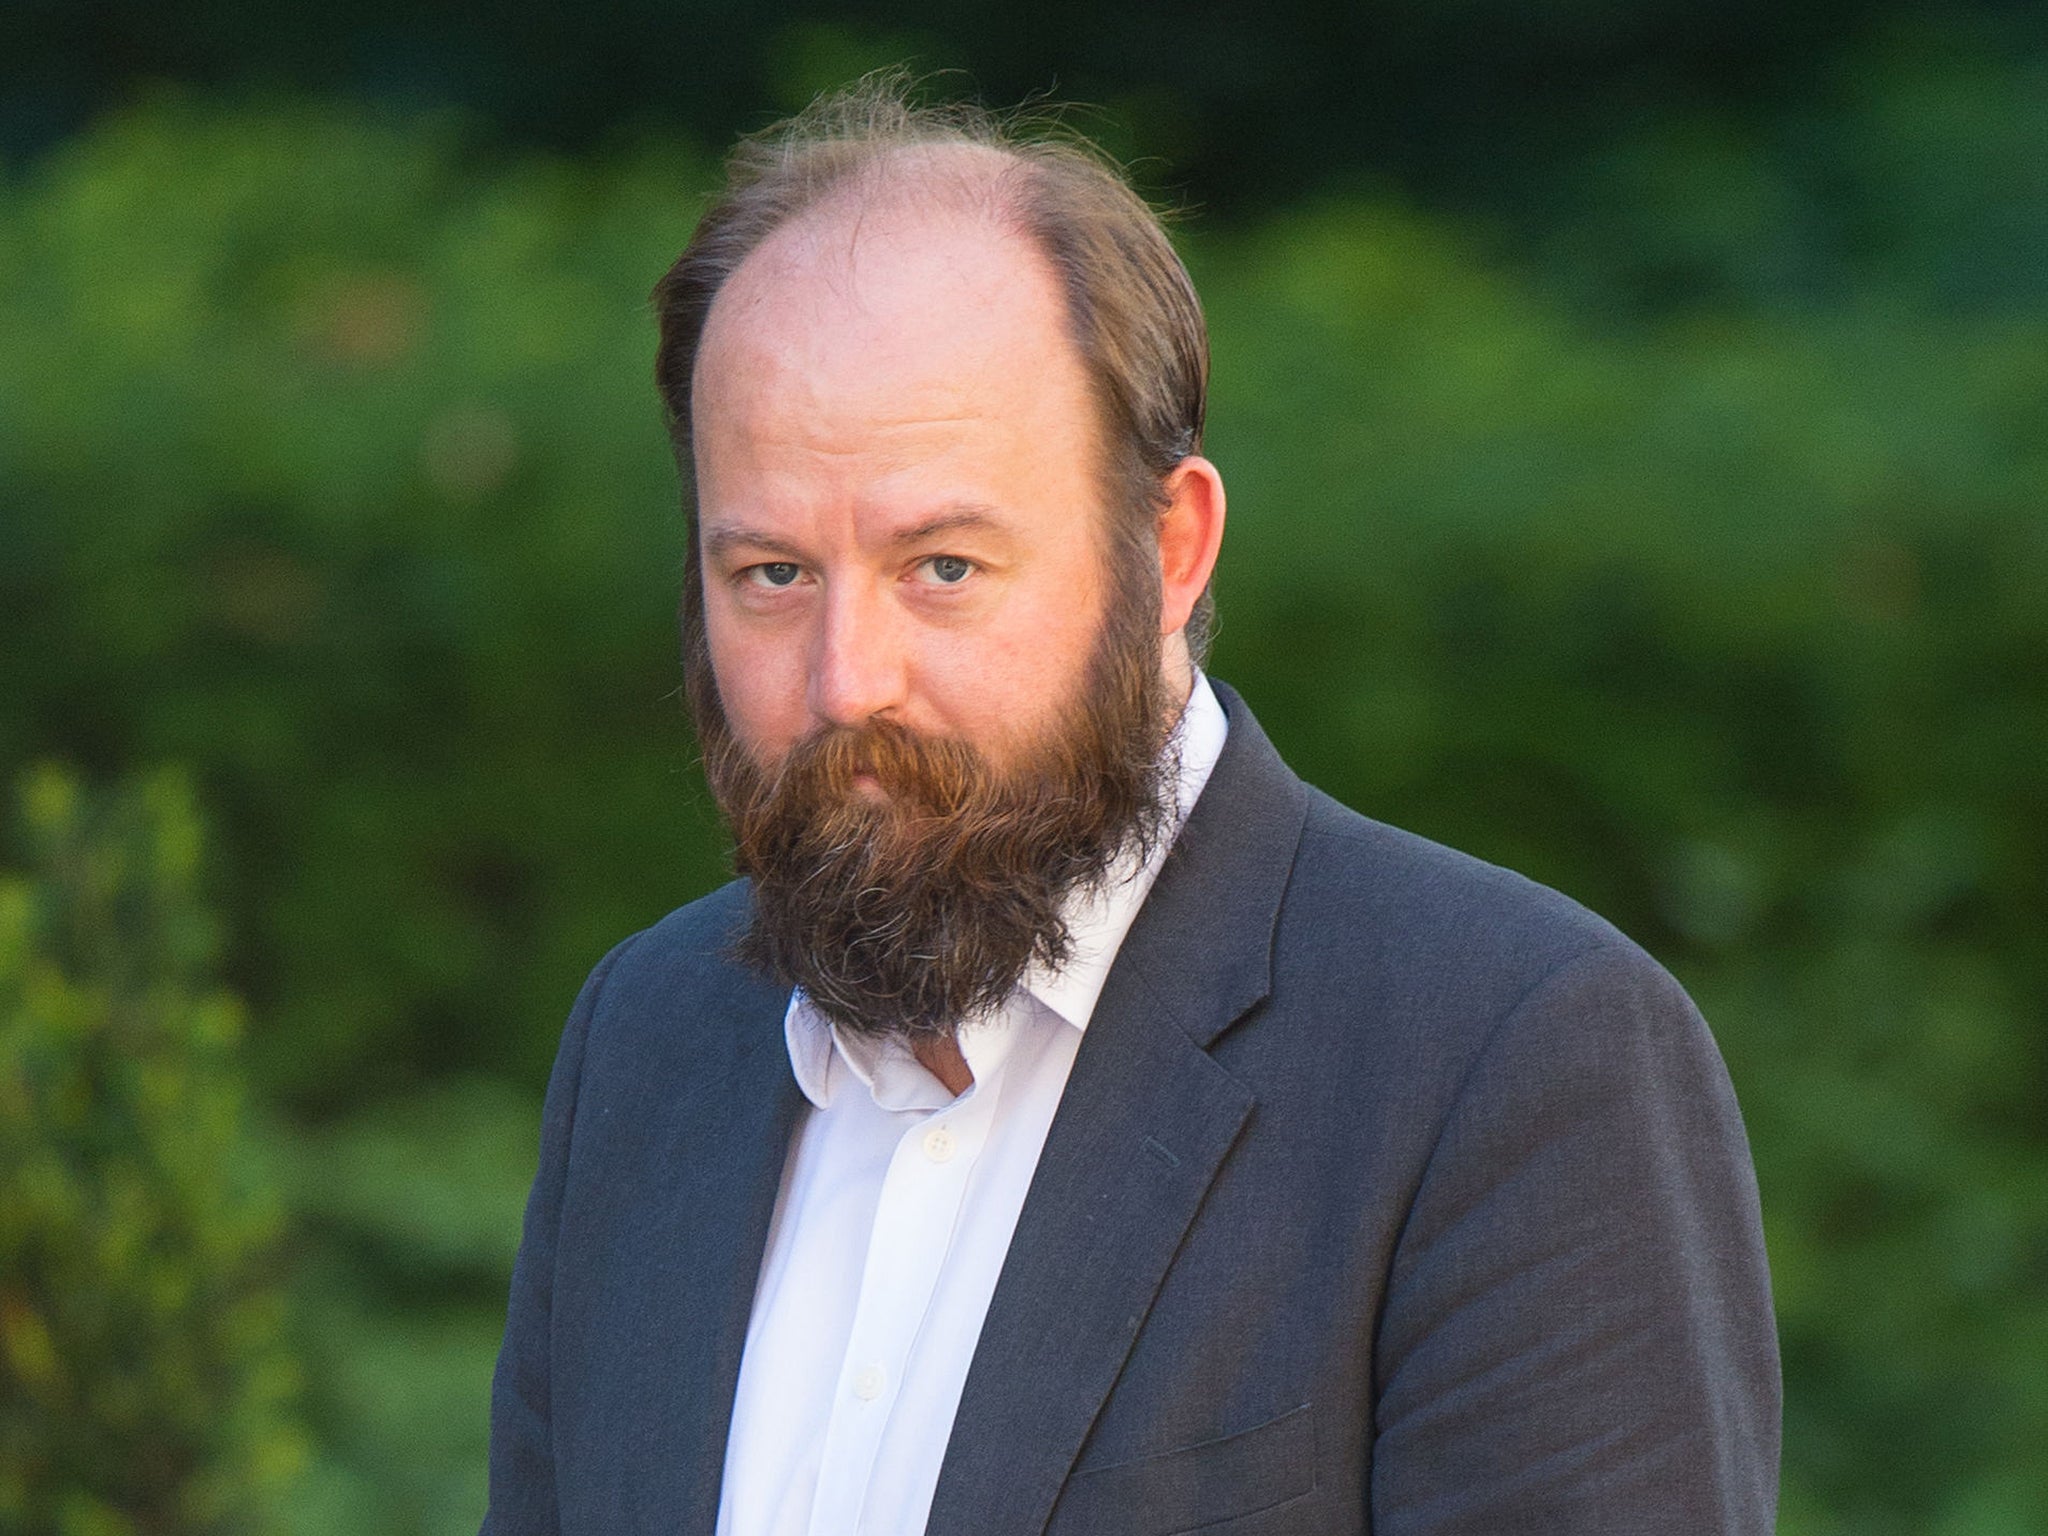 Nick Timothy is understood to still speak to the Prime Minister, having resigned after the disastrous June election